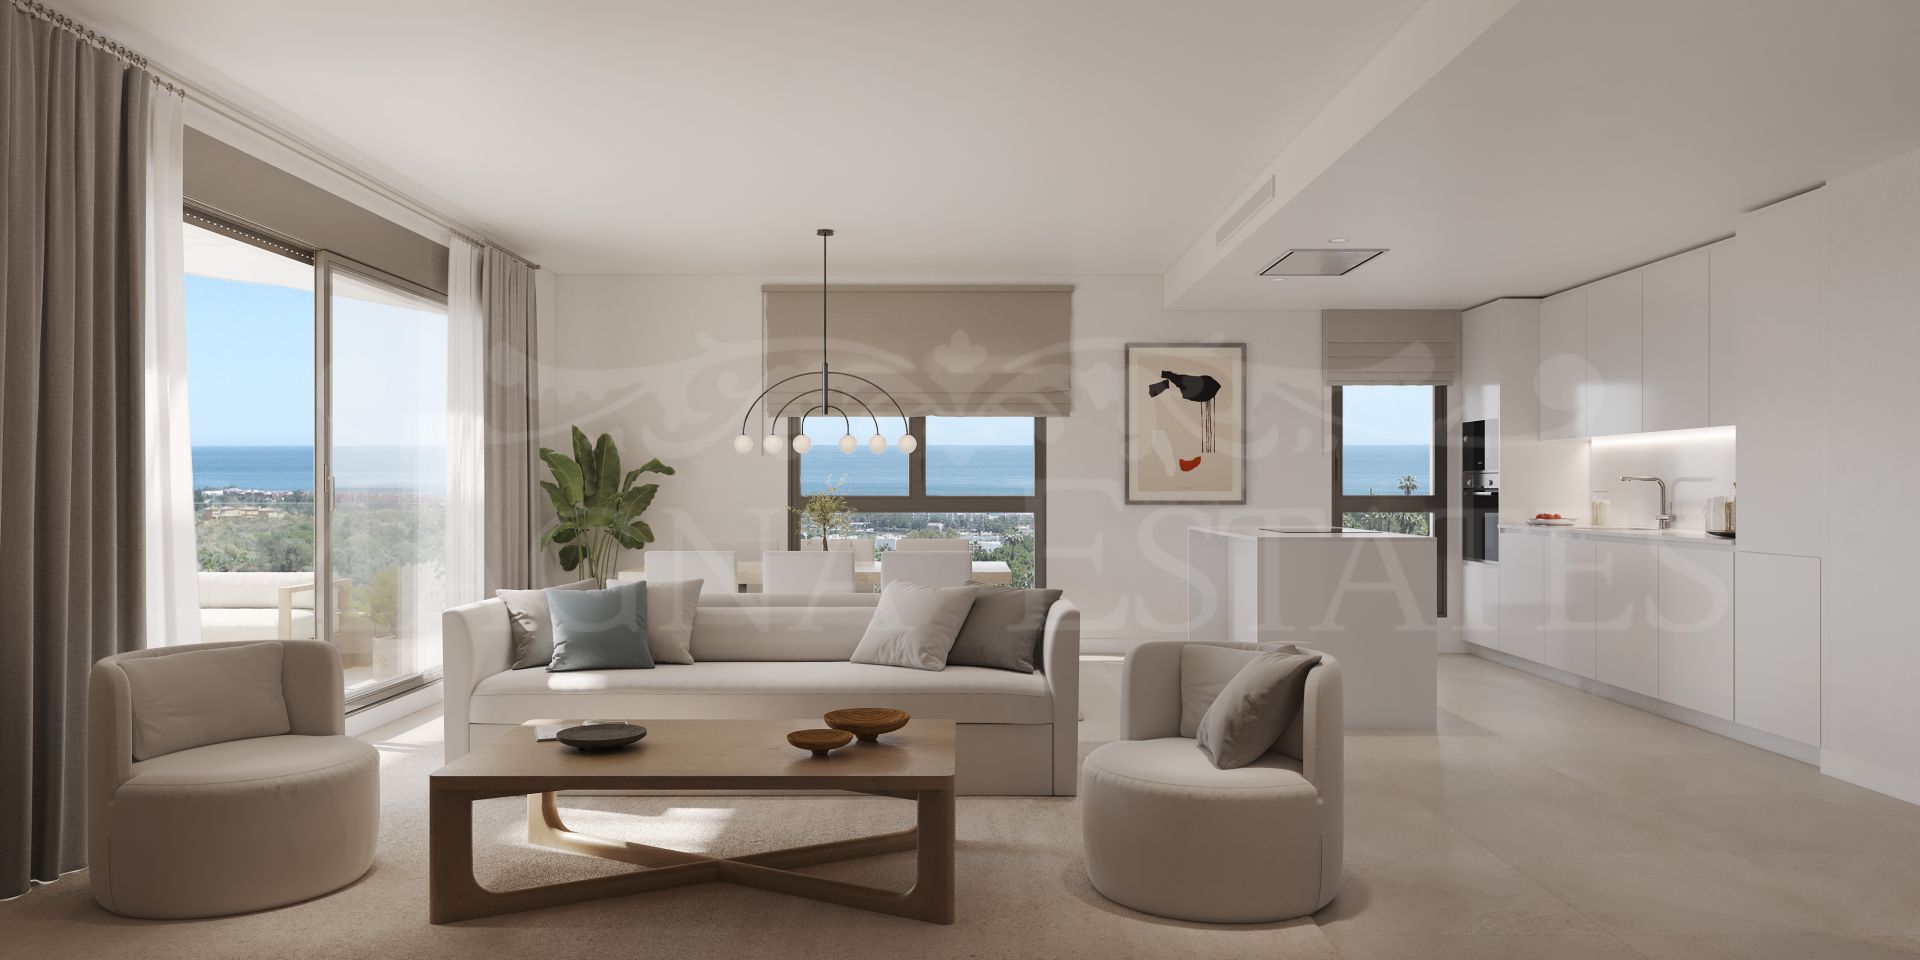 Newly built apartment with sea views in Estepona.